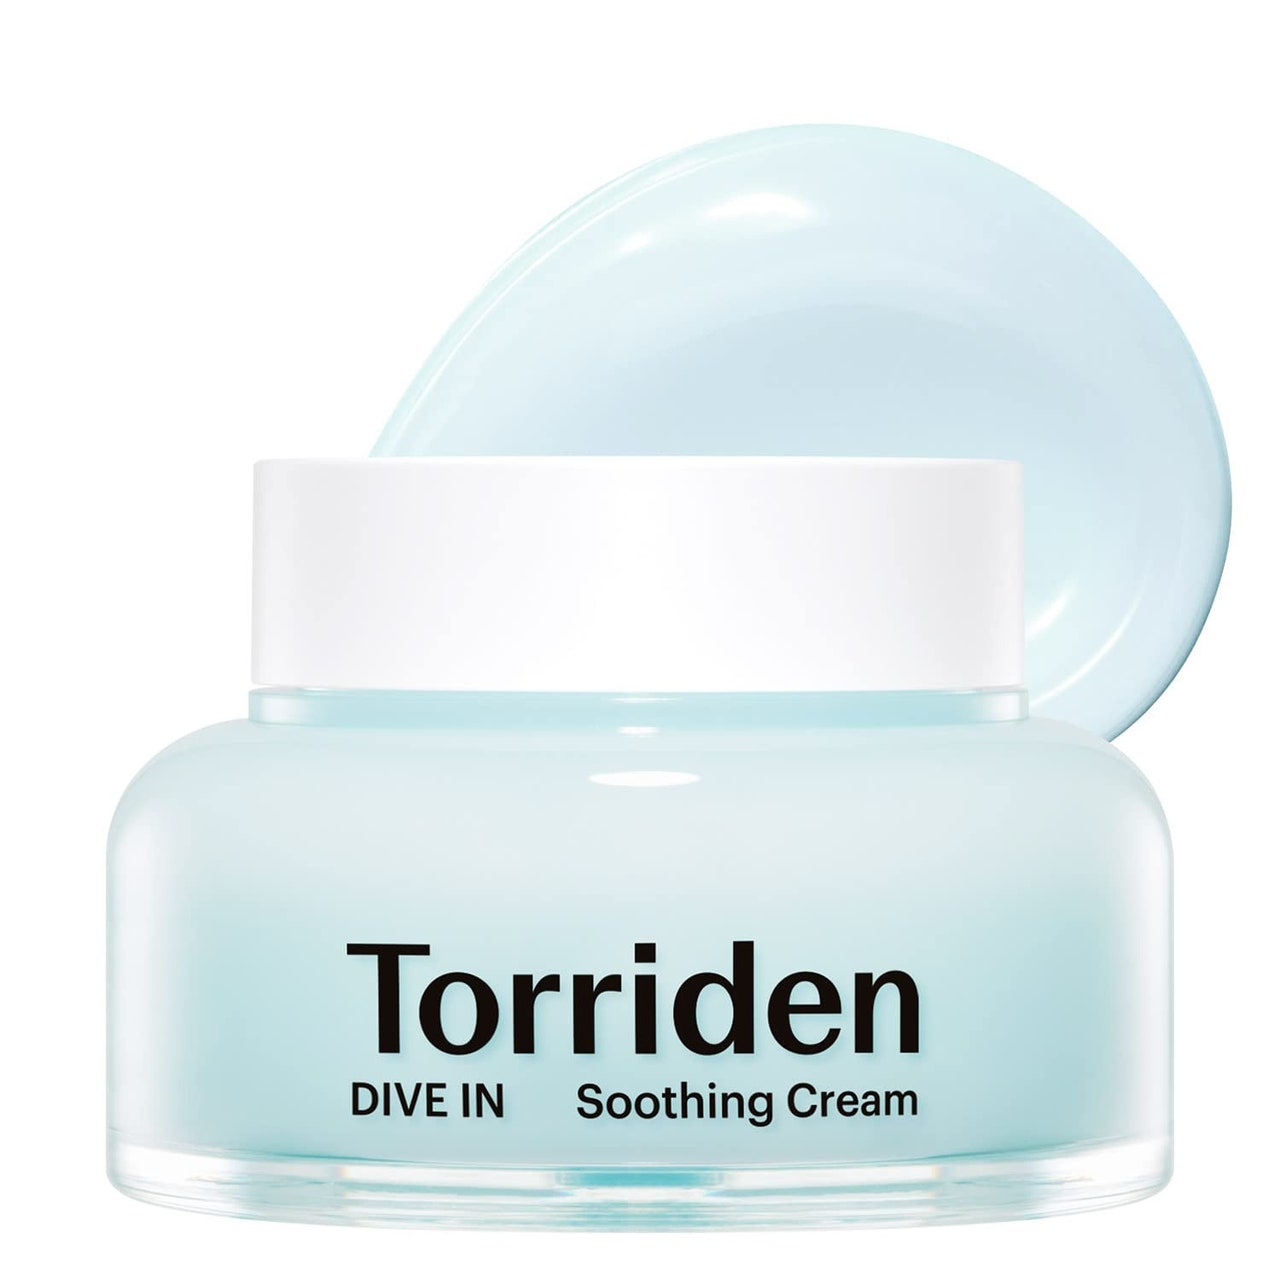 Torriden Dive-In Low-Molecular Hyaluronic Acid Soothing Cream jar of light blue moisturizer with white lid on white background